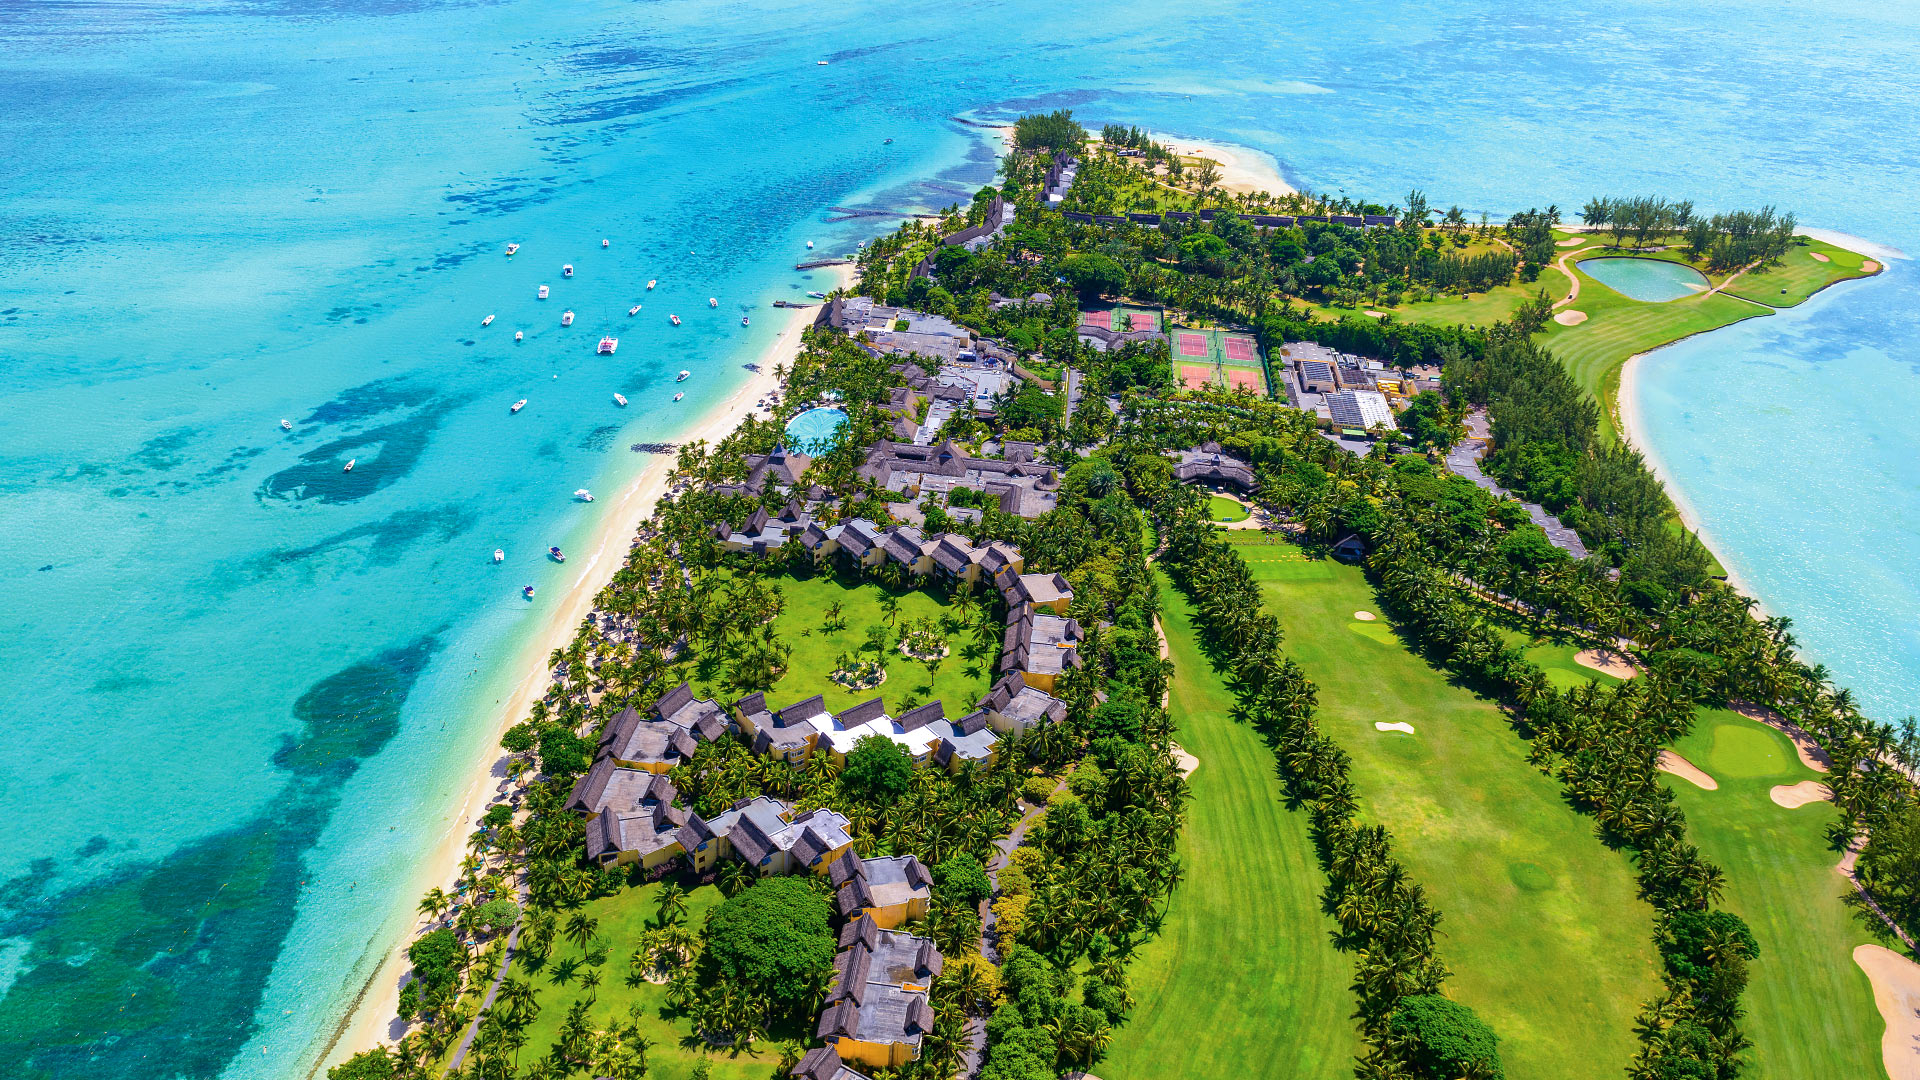 Our 5 star Hotels & Resorts in Mauritius